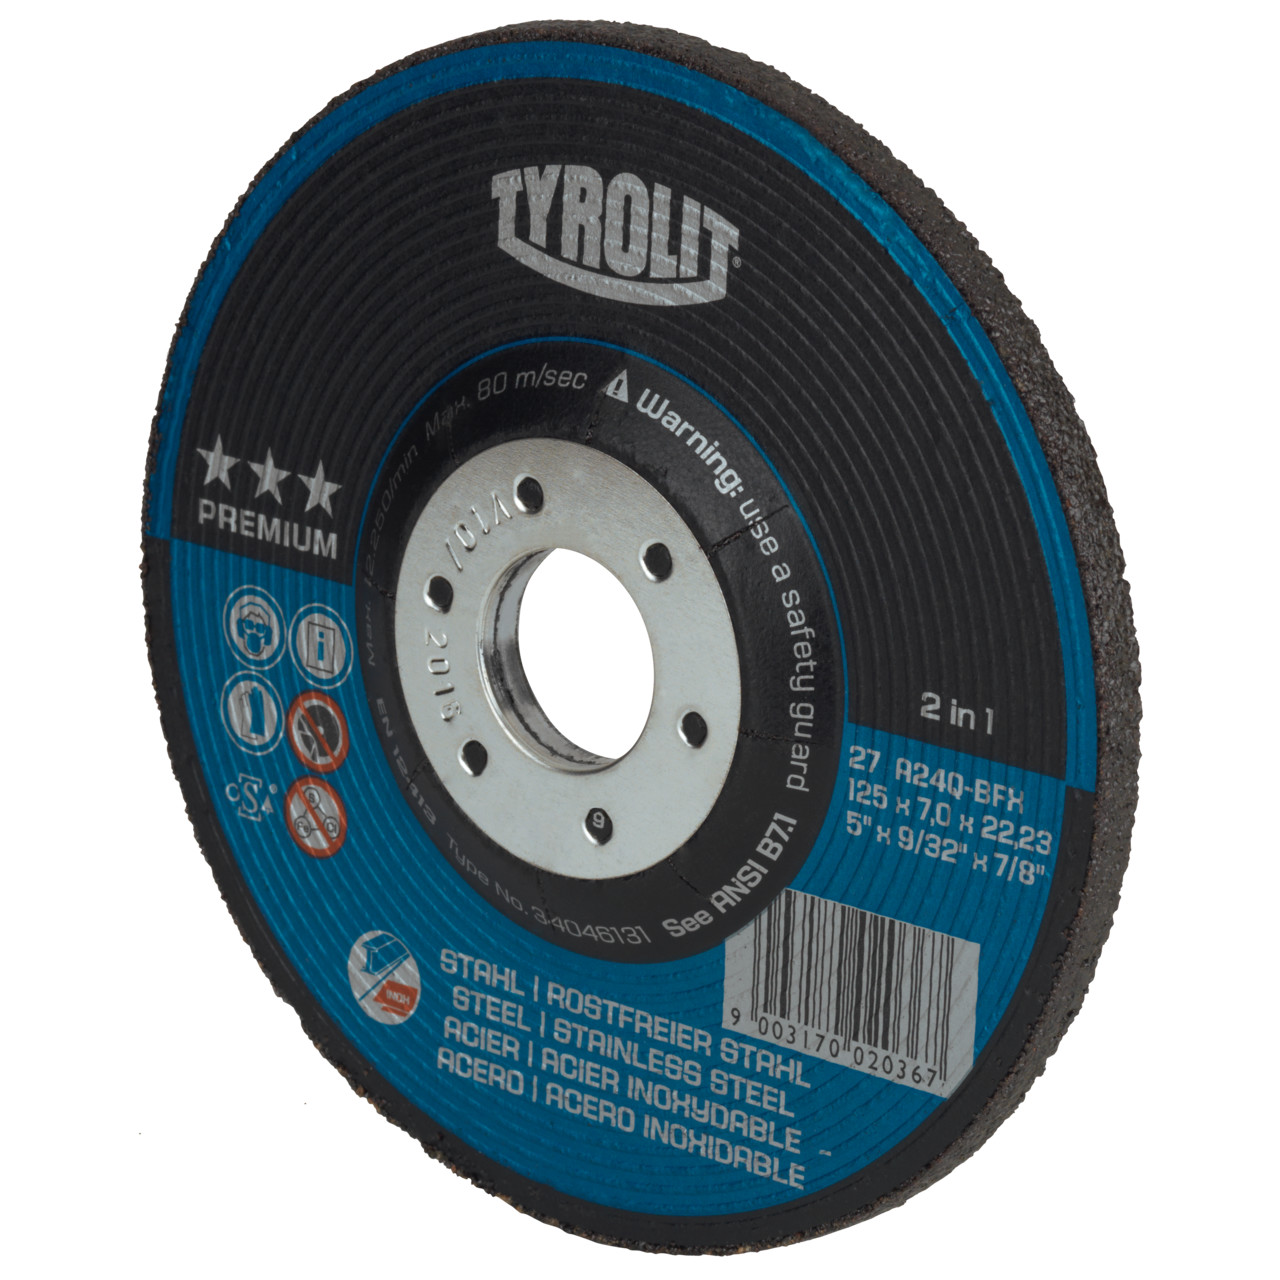 TYROLIT grinding wheel DxUxH 150x4x22.23 2in1 for steel and stainless steel, shape: 27 - offset version, Art. 734378